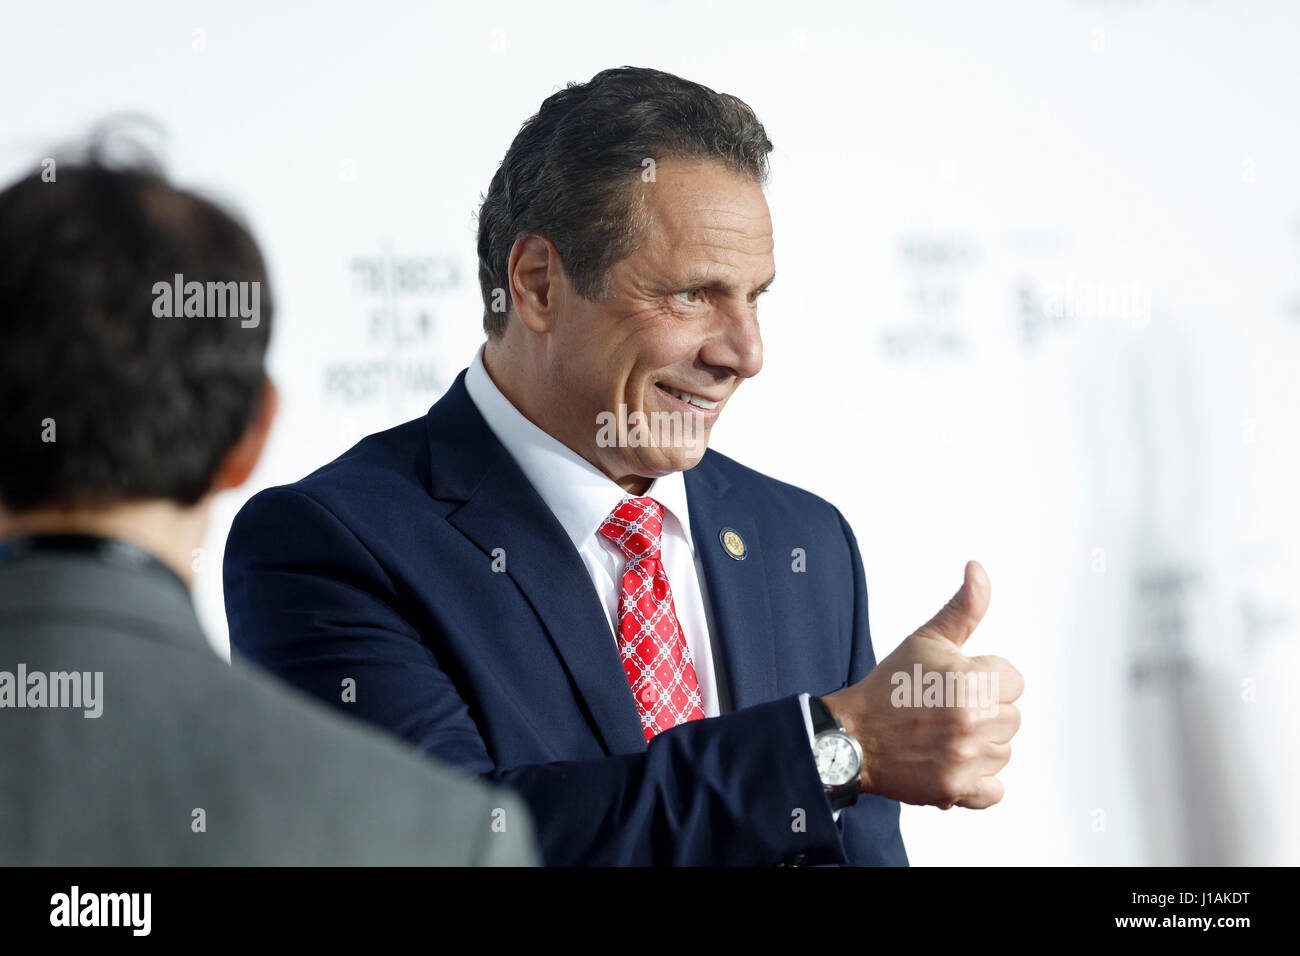 New York, USA. 19. April 2017. Gouverneur von New York, Andrew Cuomo kommt bei der 2017 Tribeca Film Festival Opening Night, Clive Davis: The Soundtrack Of Our lebt Credit: The Foto Zugang/Alamy Live News Stockfoto